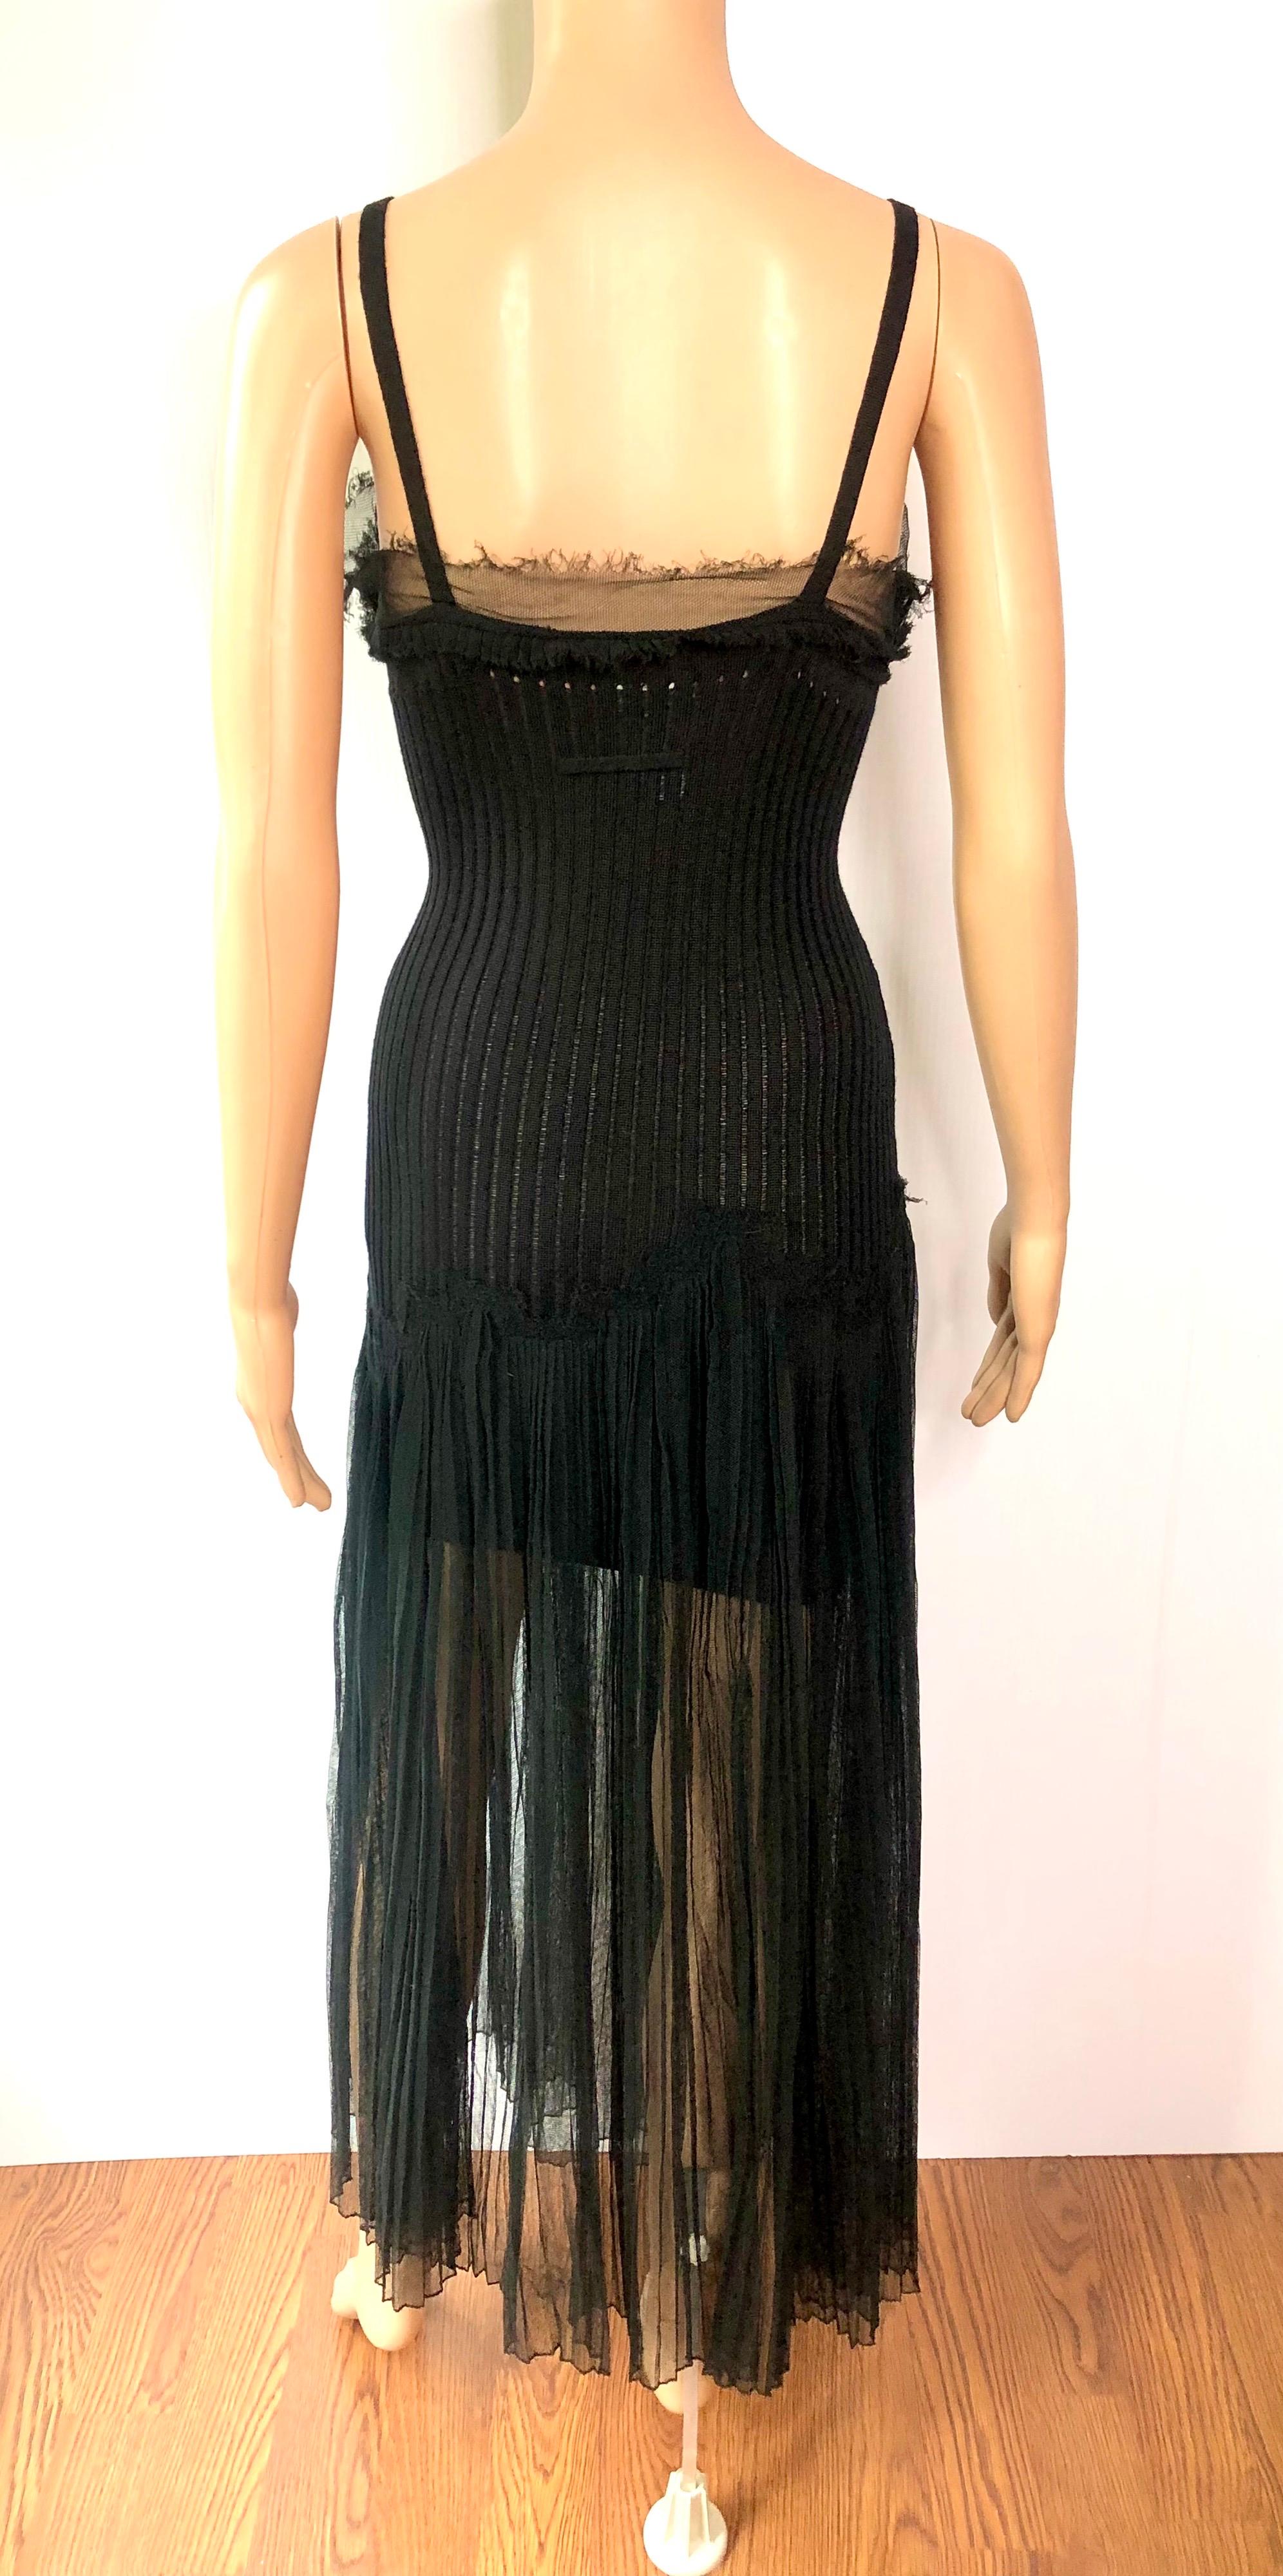 Jean Paul Gaultier Vintage Semi-Sheer Knit Mesh Black Maxi Dress In Good Condition For Sale In Naples, FL